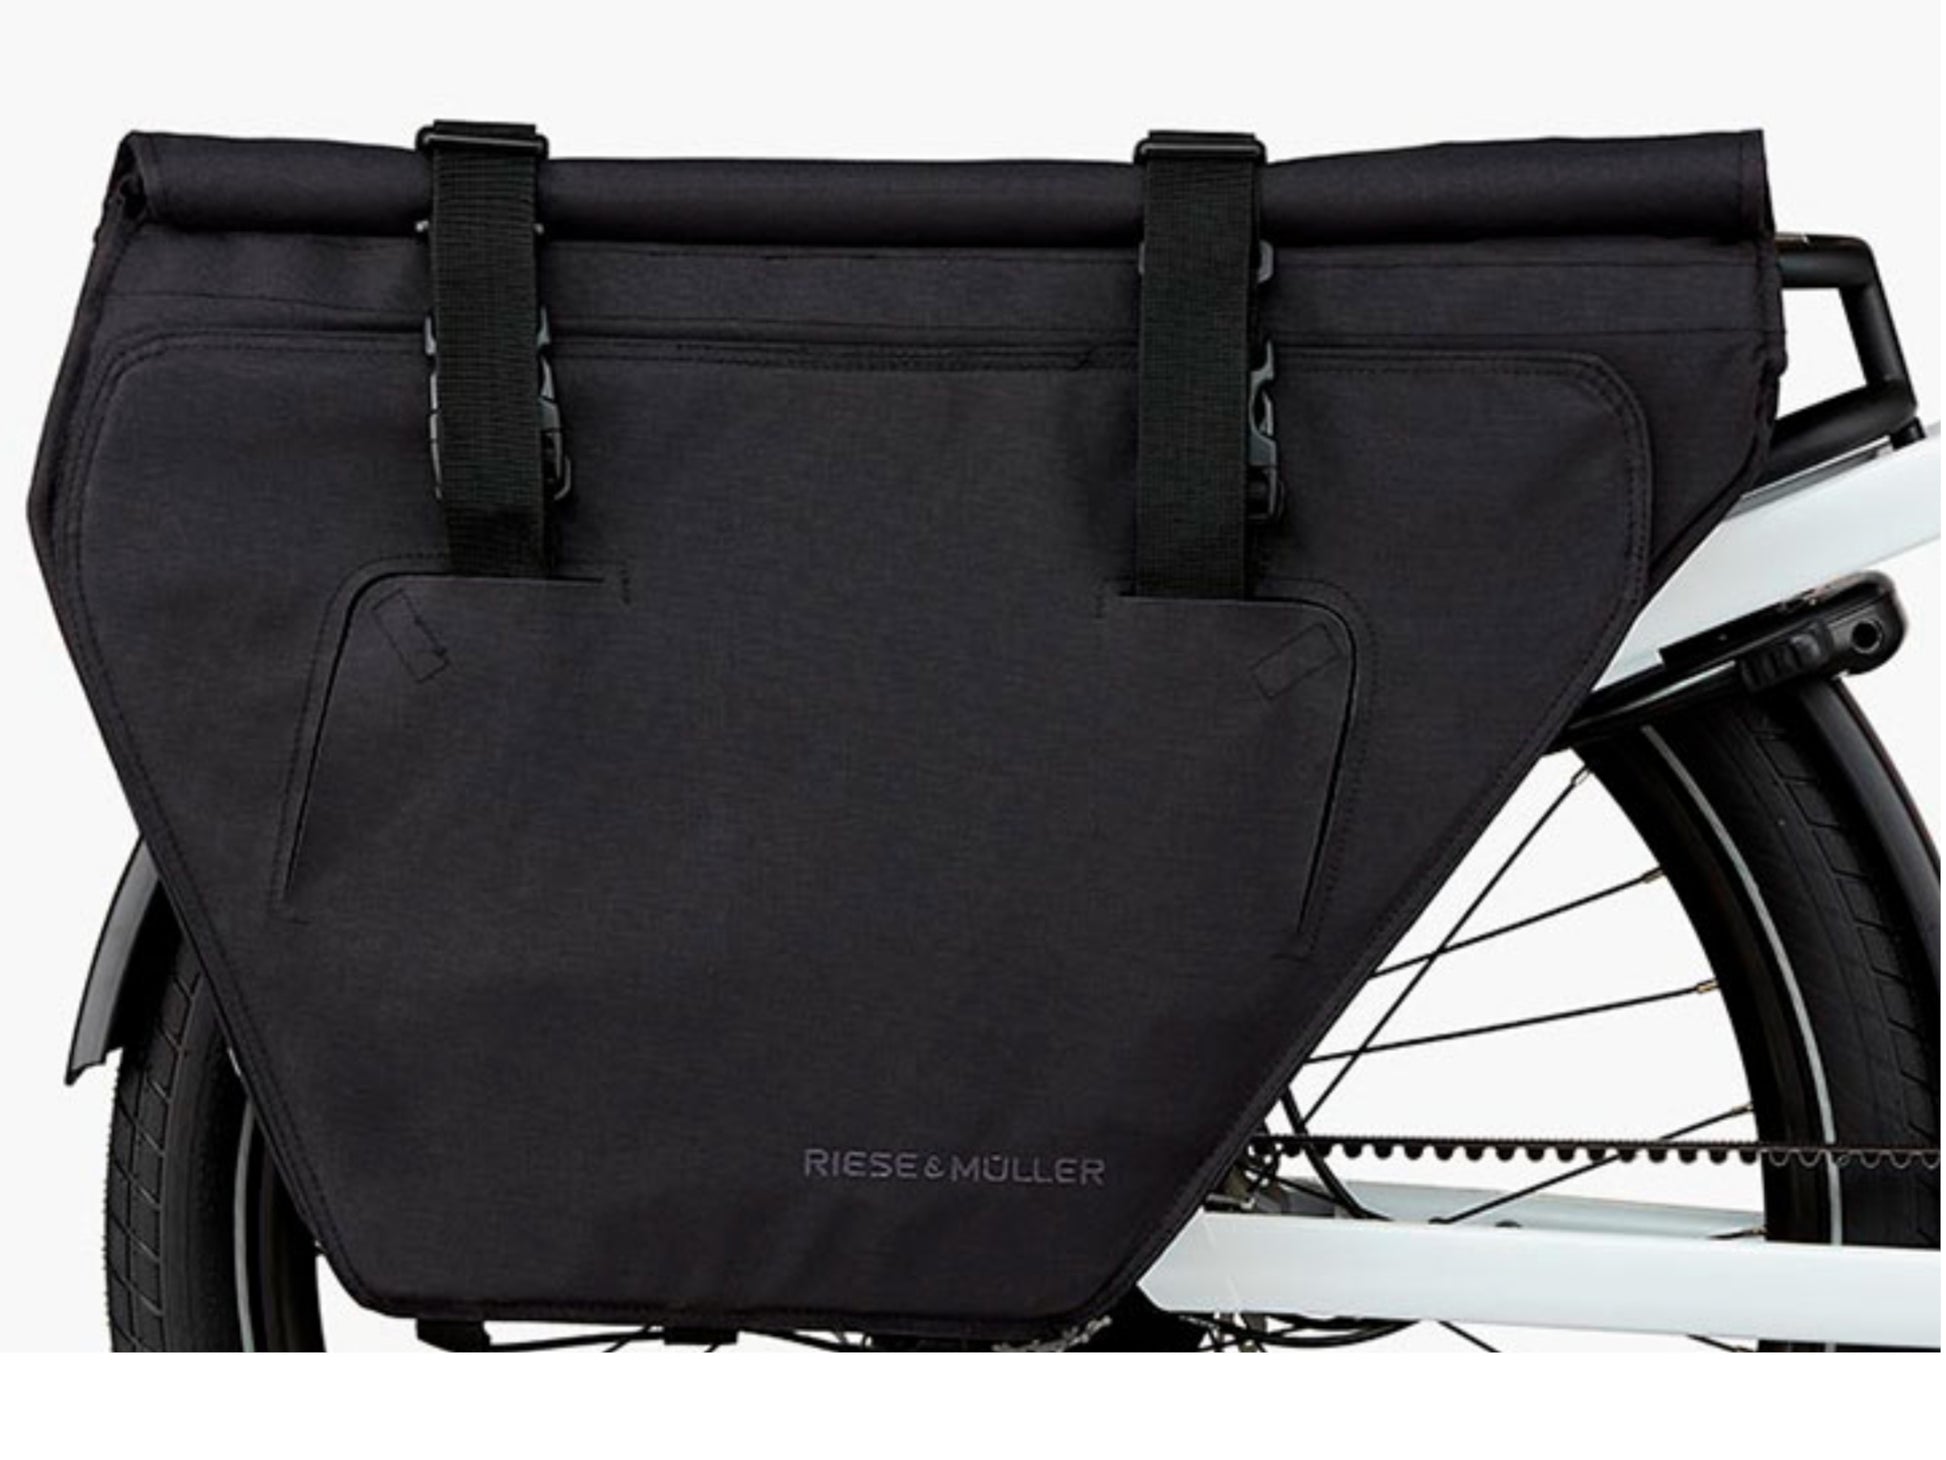 Riese and Muller Multicharger Mixte GT Vario HS emtb hardtail close up rear cargo bags